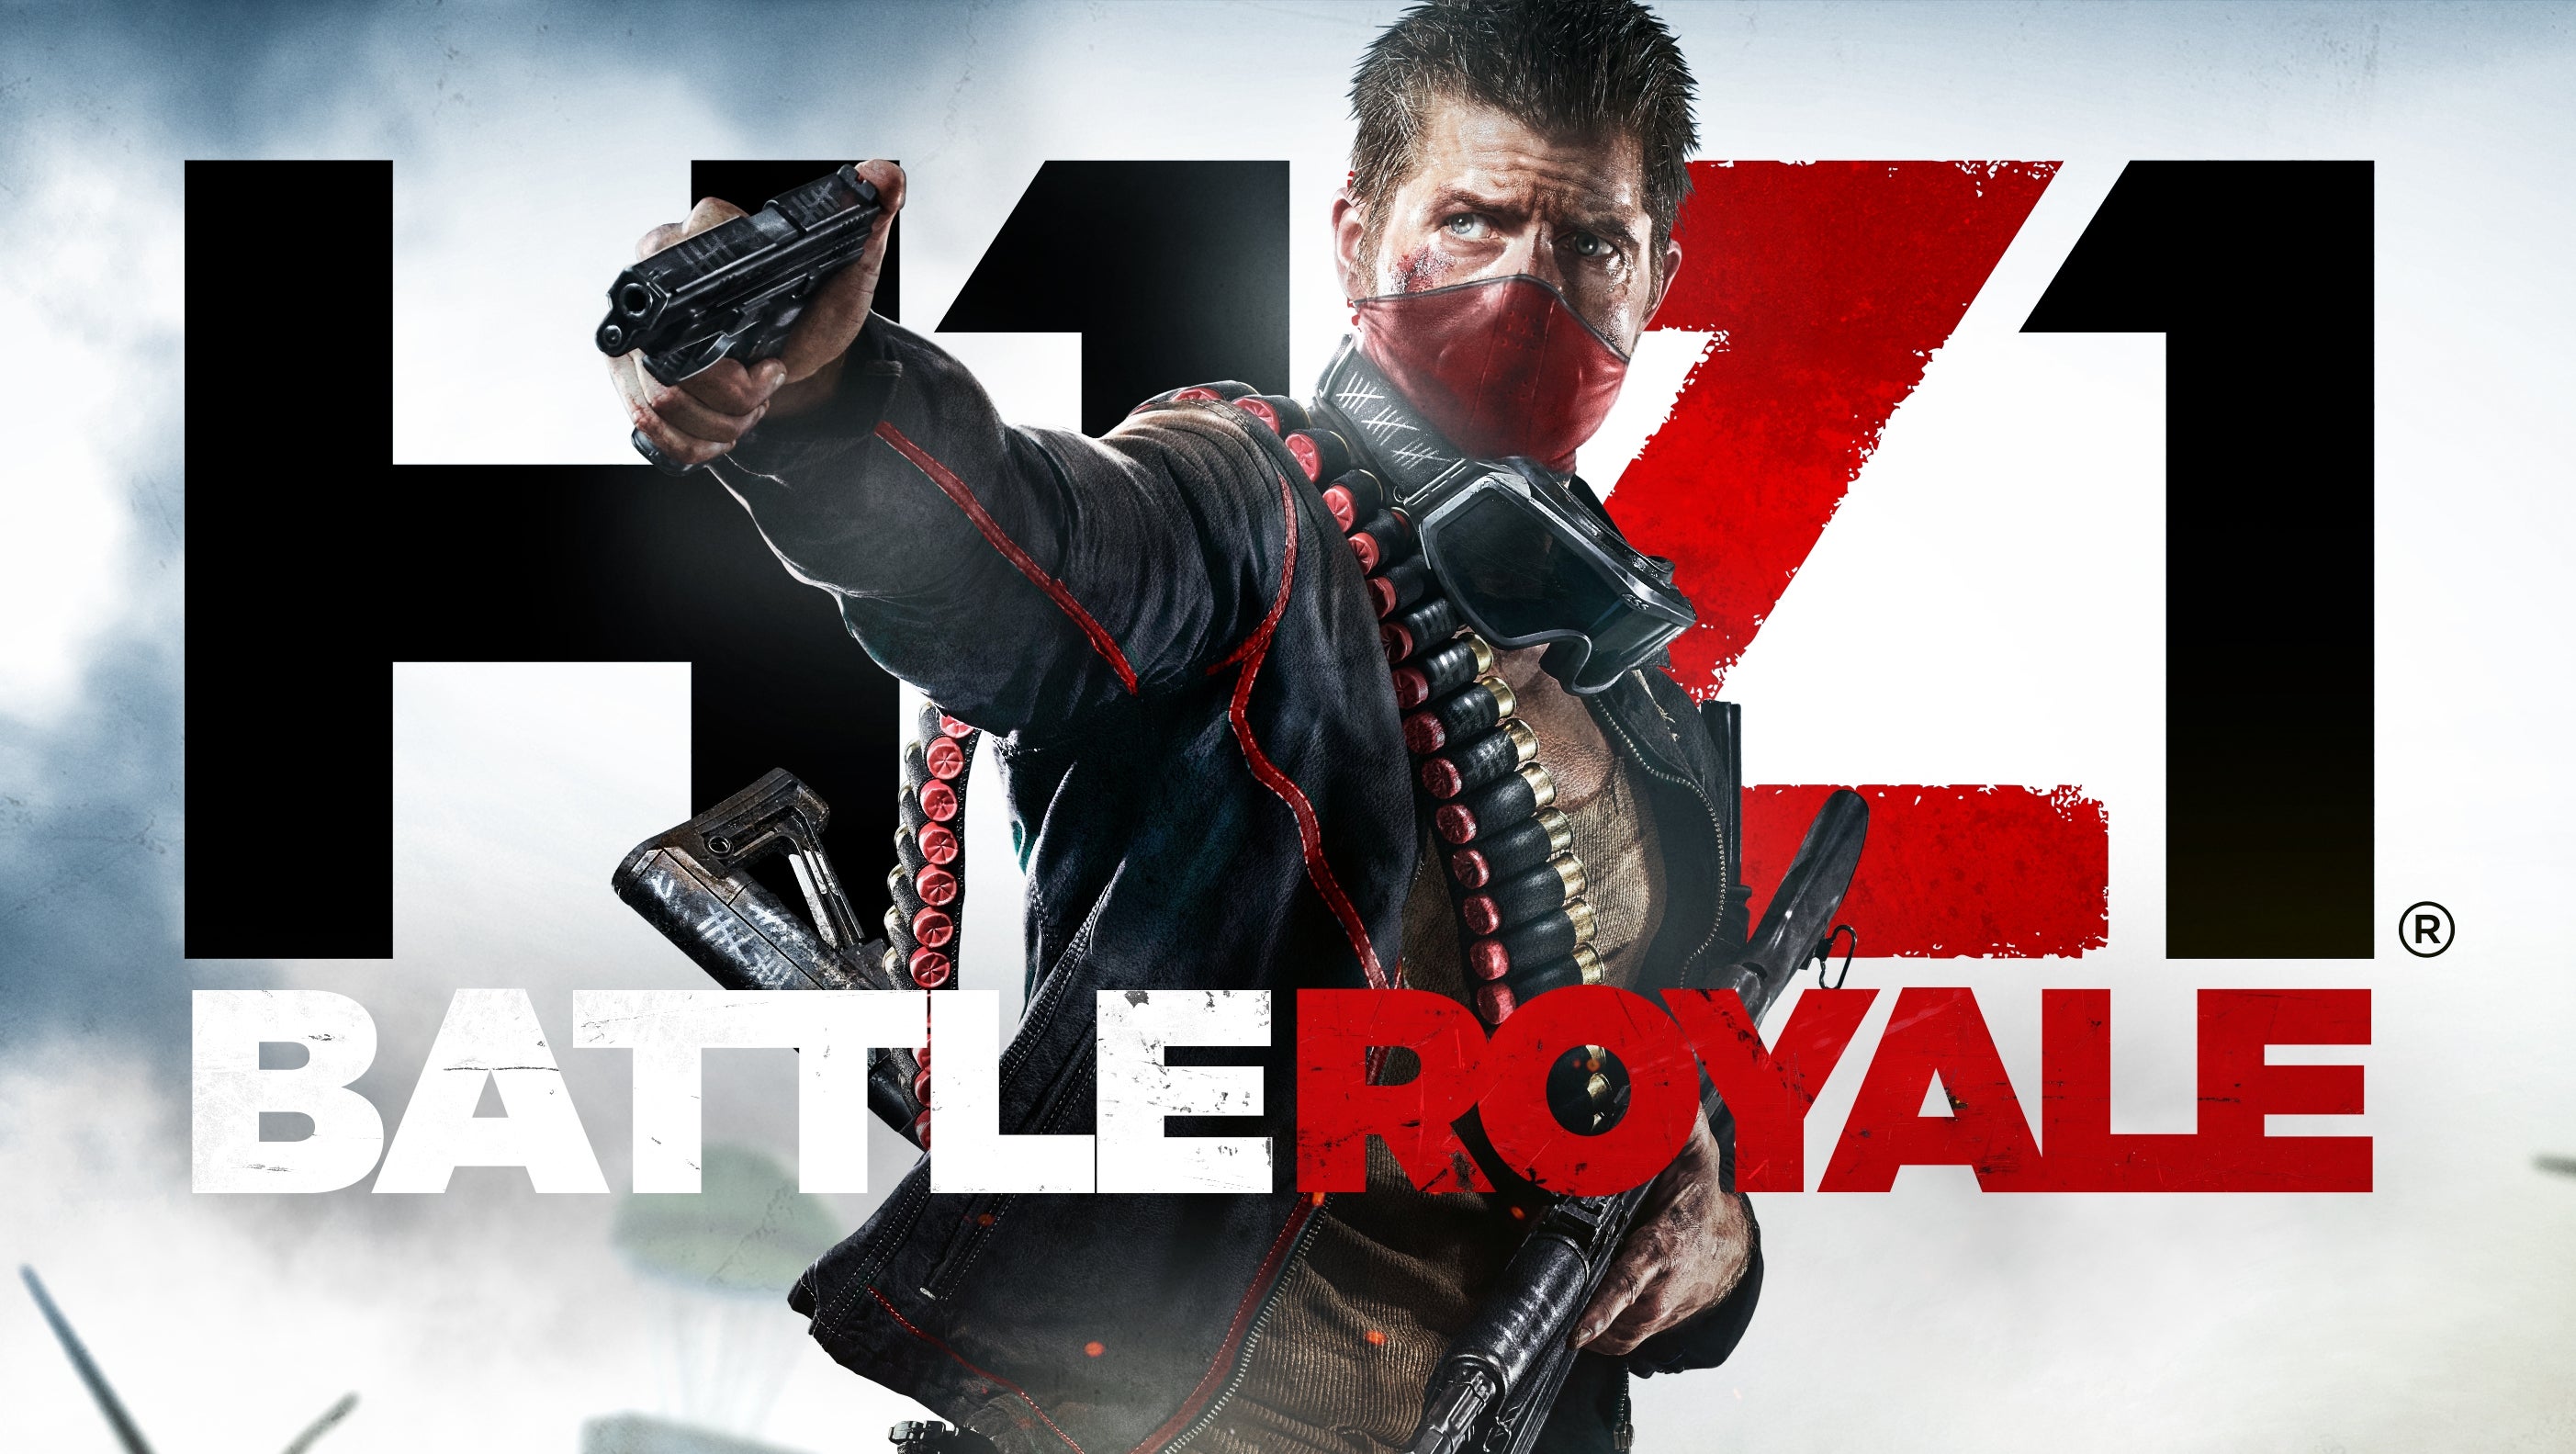 Free-to-play battle royale shooter PS4 next month | VG247